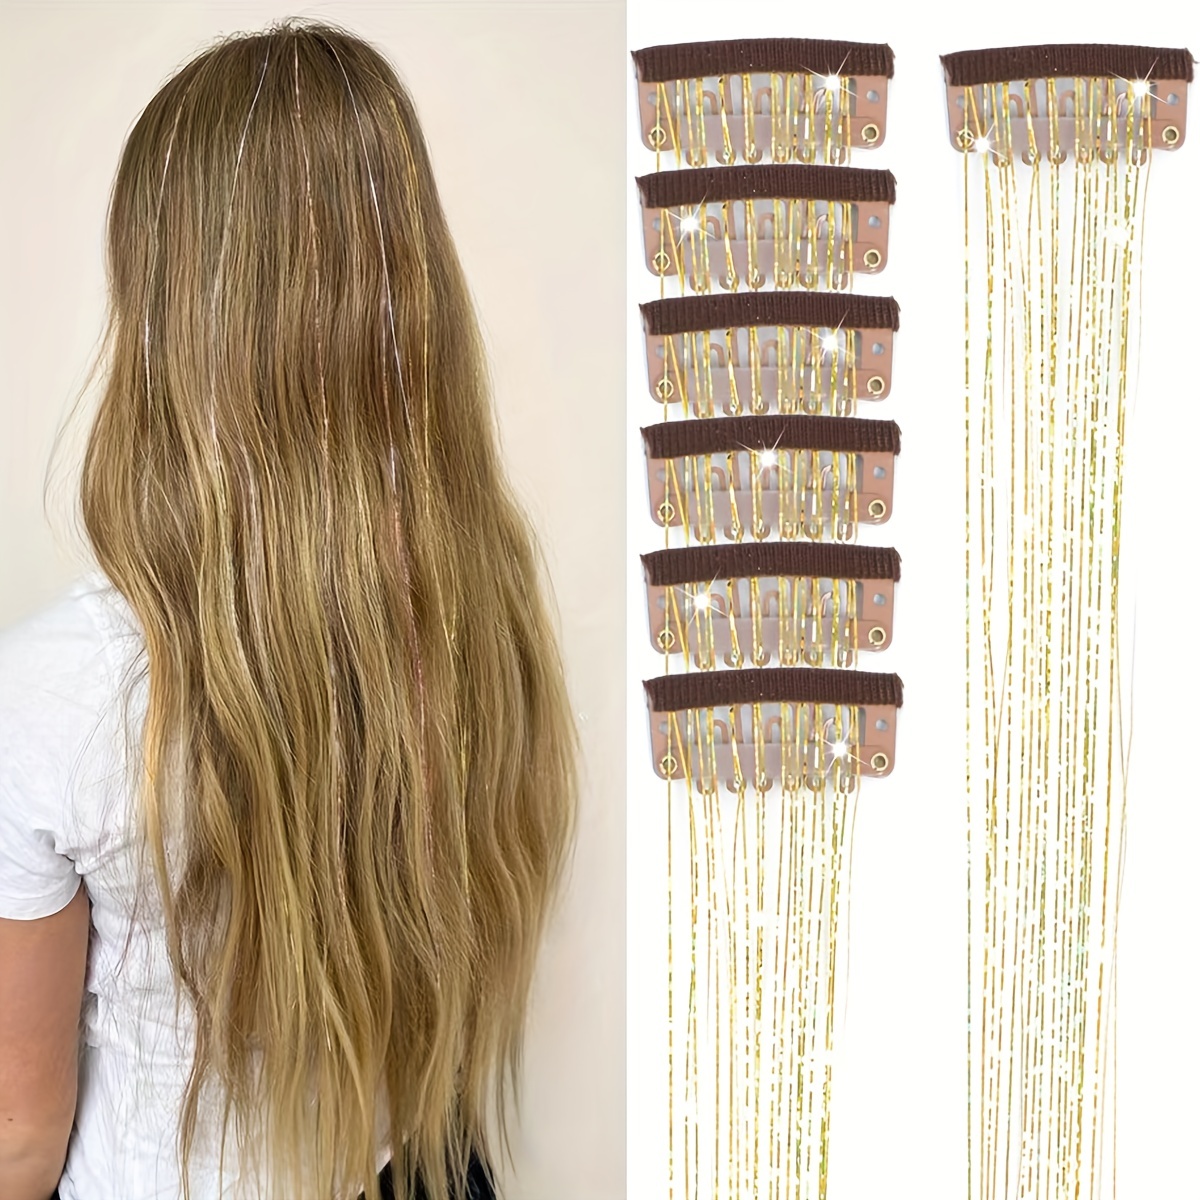 What is Hair Tinsel and How to Put in Fairy Extensions at Home?